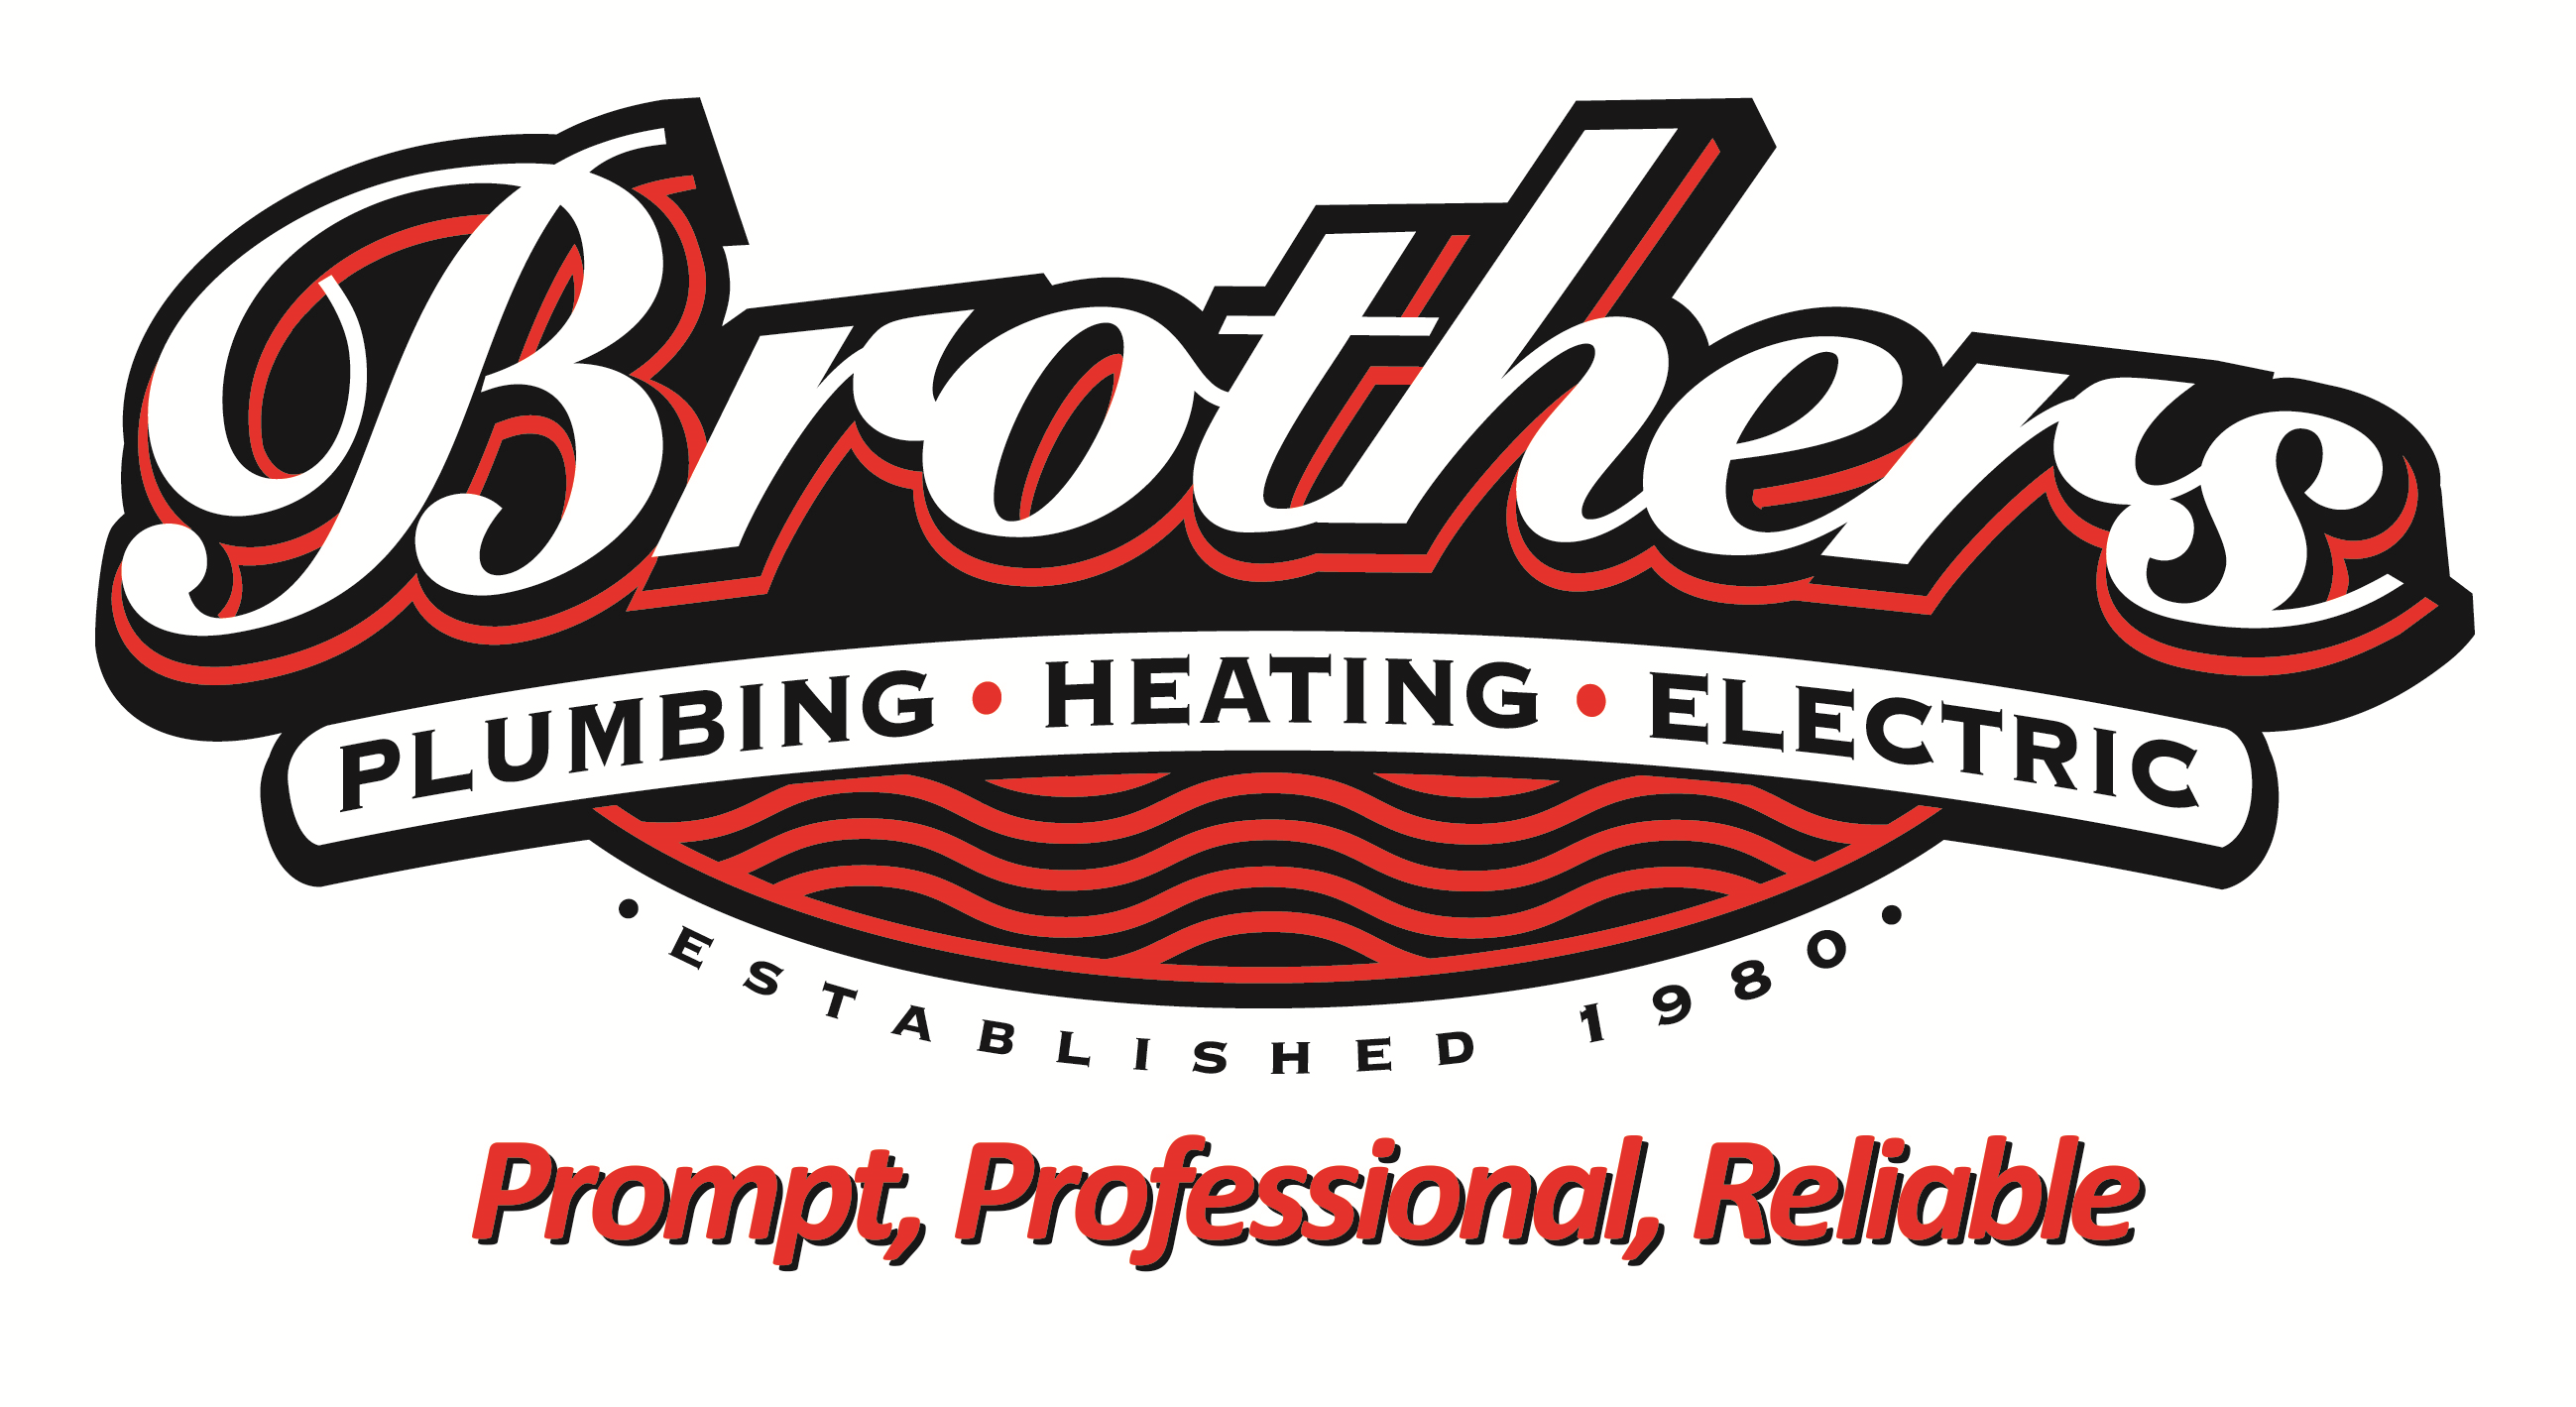 Brothers Plumbing, Heating and Electric Company Logo